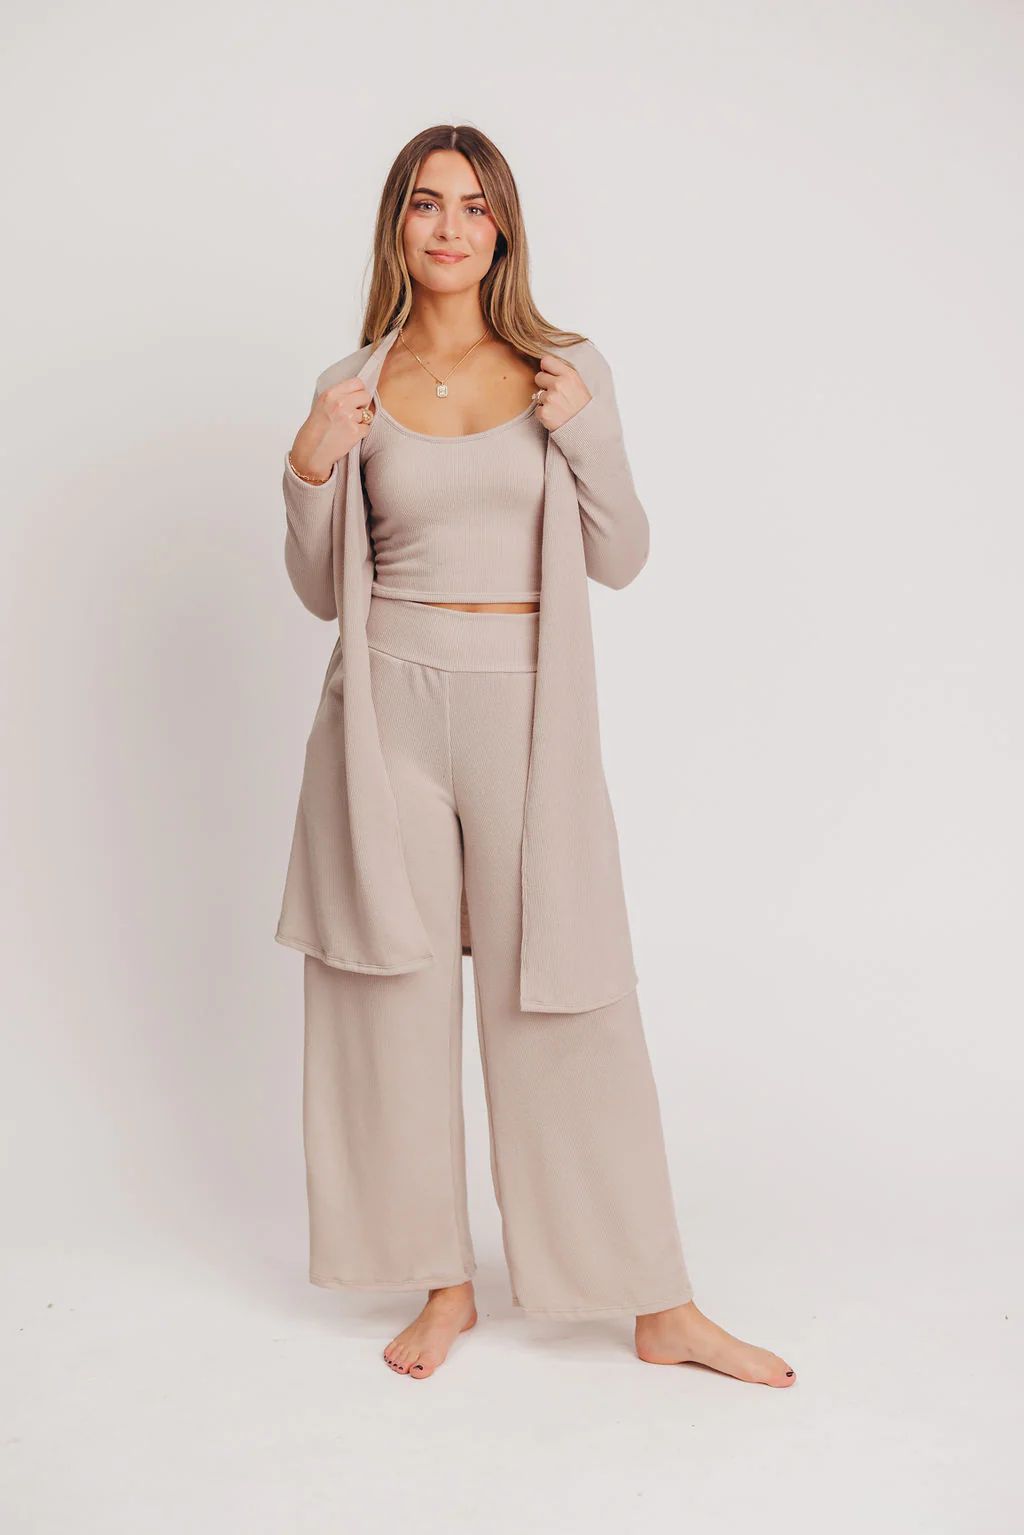 Betsy Ribbed Cardigan in Khaki - Inclusive Sizing (S-2X) | Worth Collective